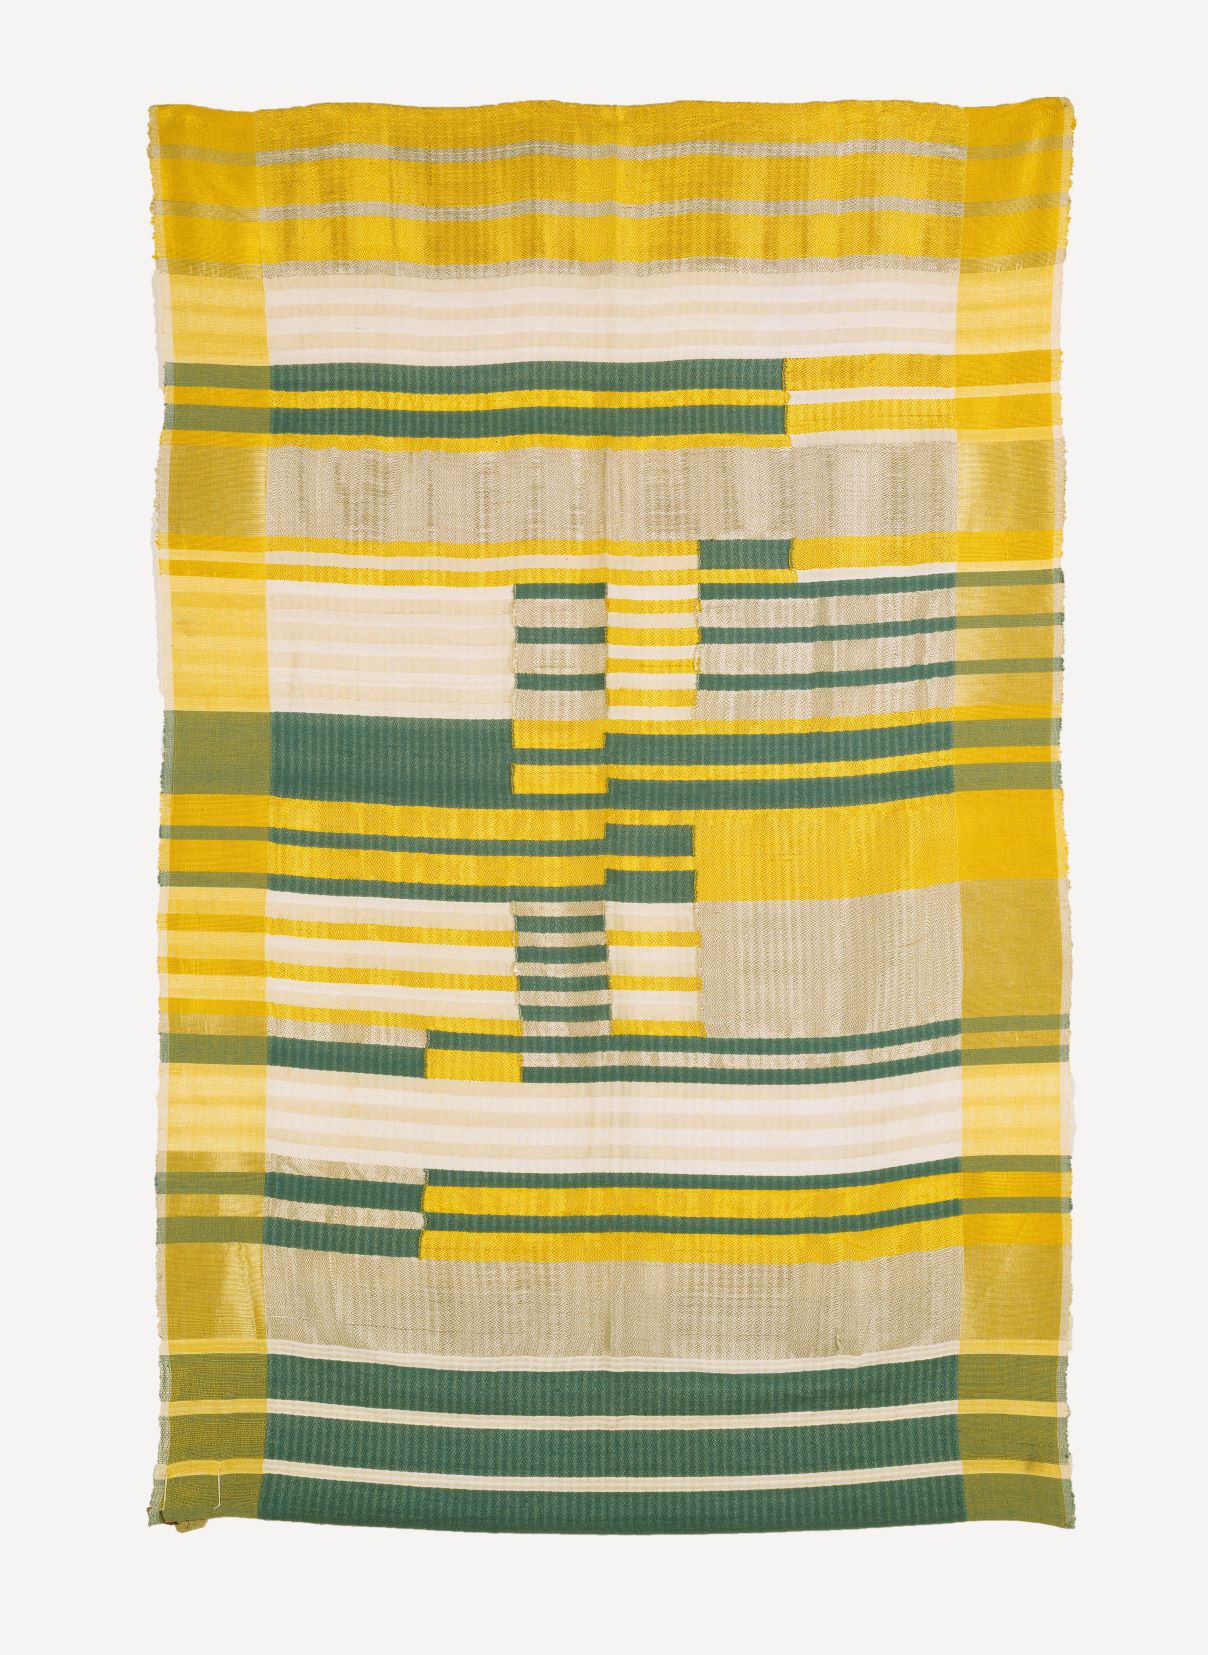 Anni Albers, Wallhanging, 1925. Silk, cotton, and acetate. 50 × 38 in. (127 × 96.5 cm). Sammlung Moderne Kunst, Munich / © 2020 The Josef and Anni Albers Foundation/Artists Rights Society (ARS), New York/DACS, London